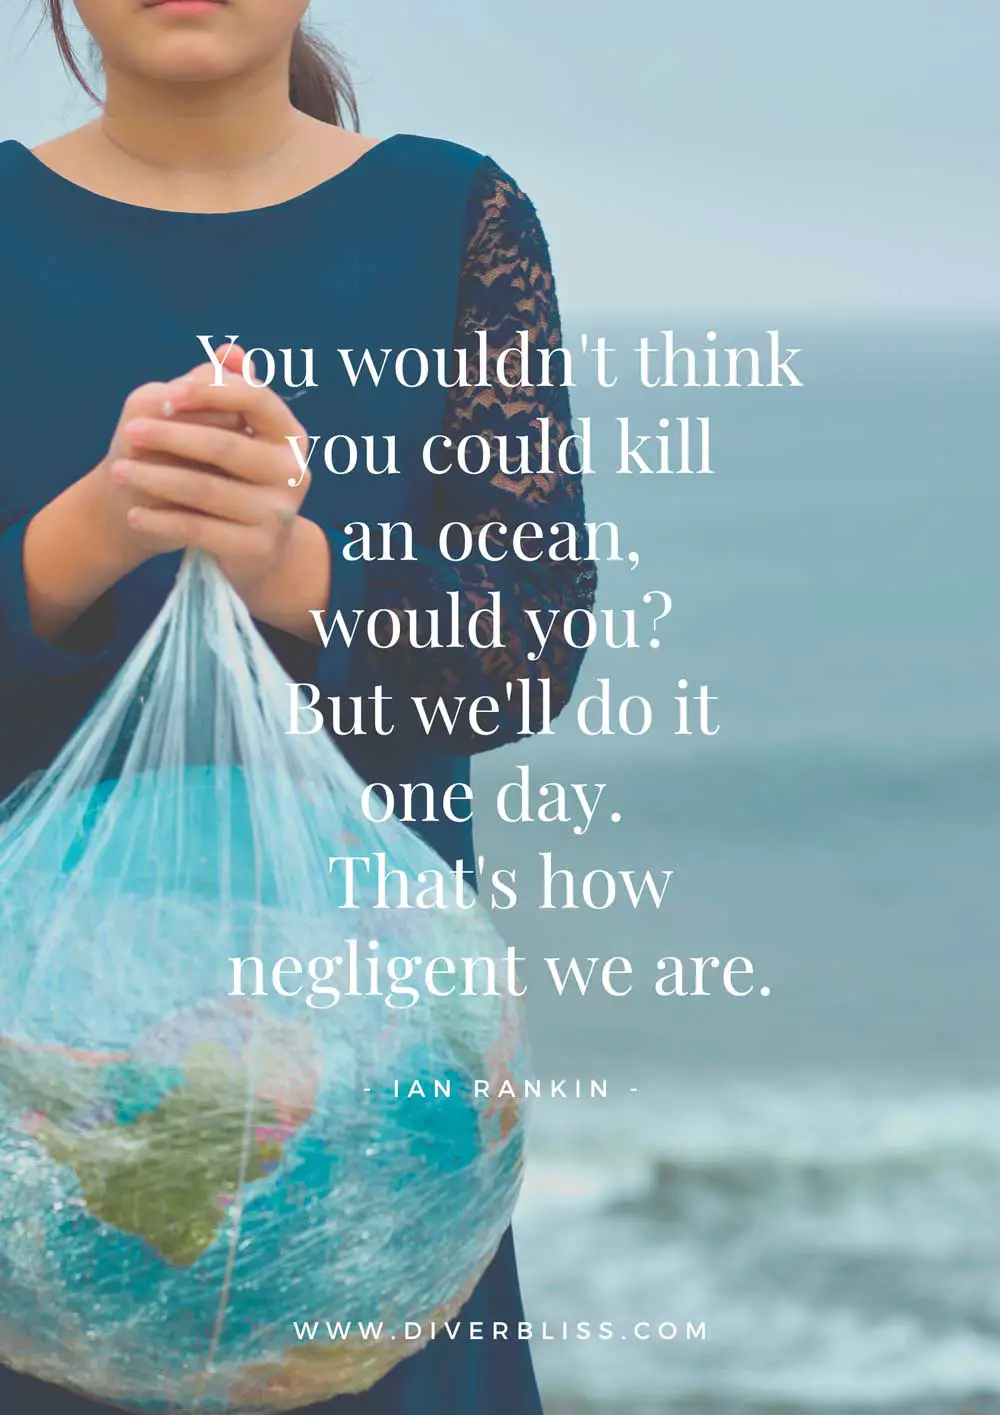 Ocean pollution Quotes Poster:  “You wouldn't think you could kill an ocean, would you? But we'll do it one day. That's how negligent we are.”– Ian Rankin